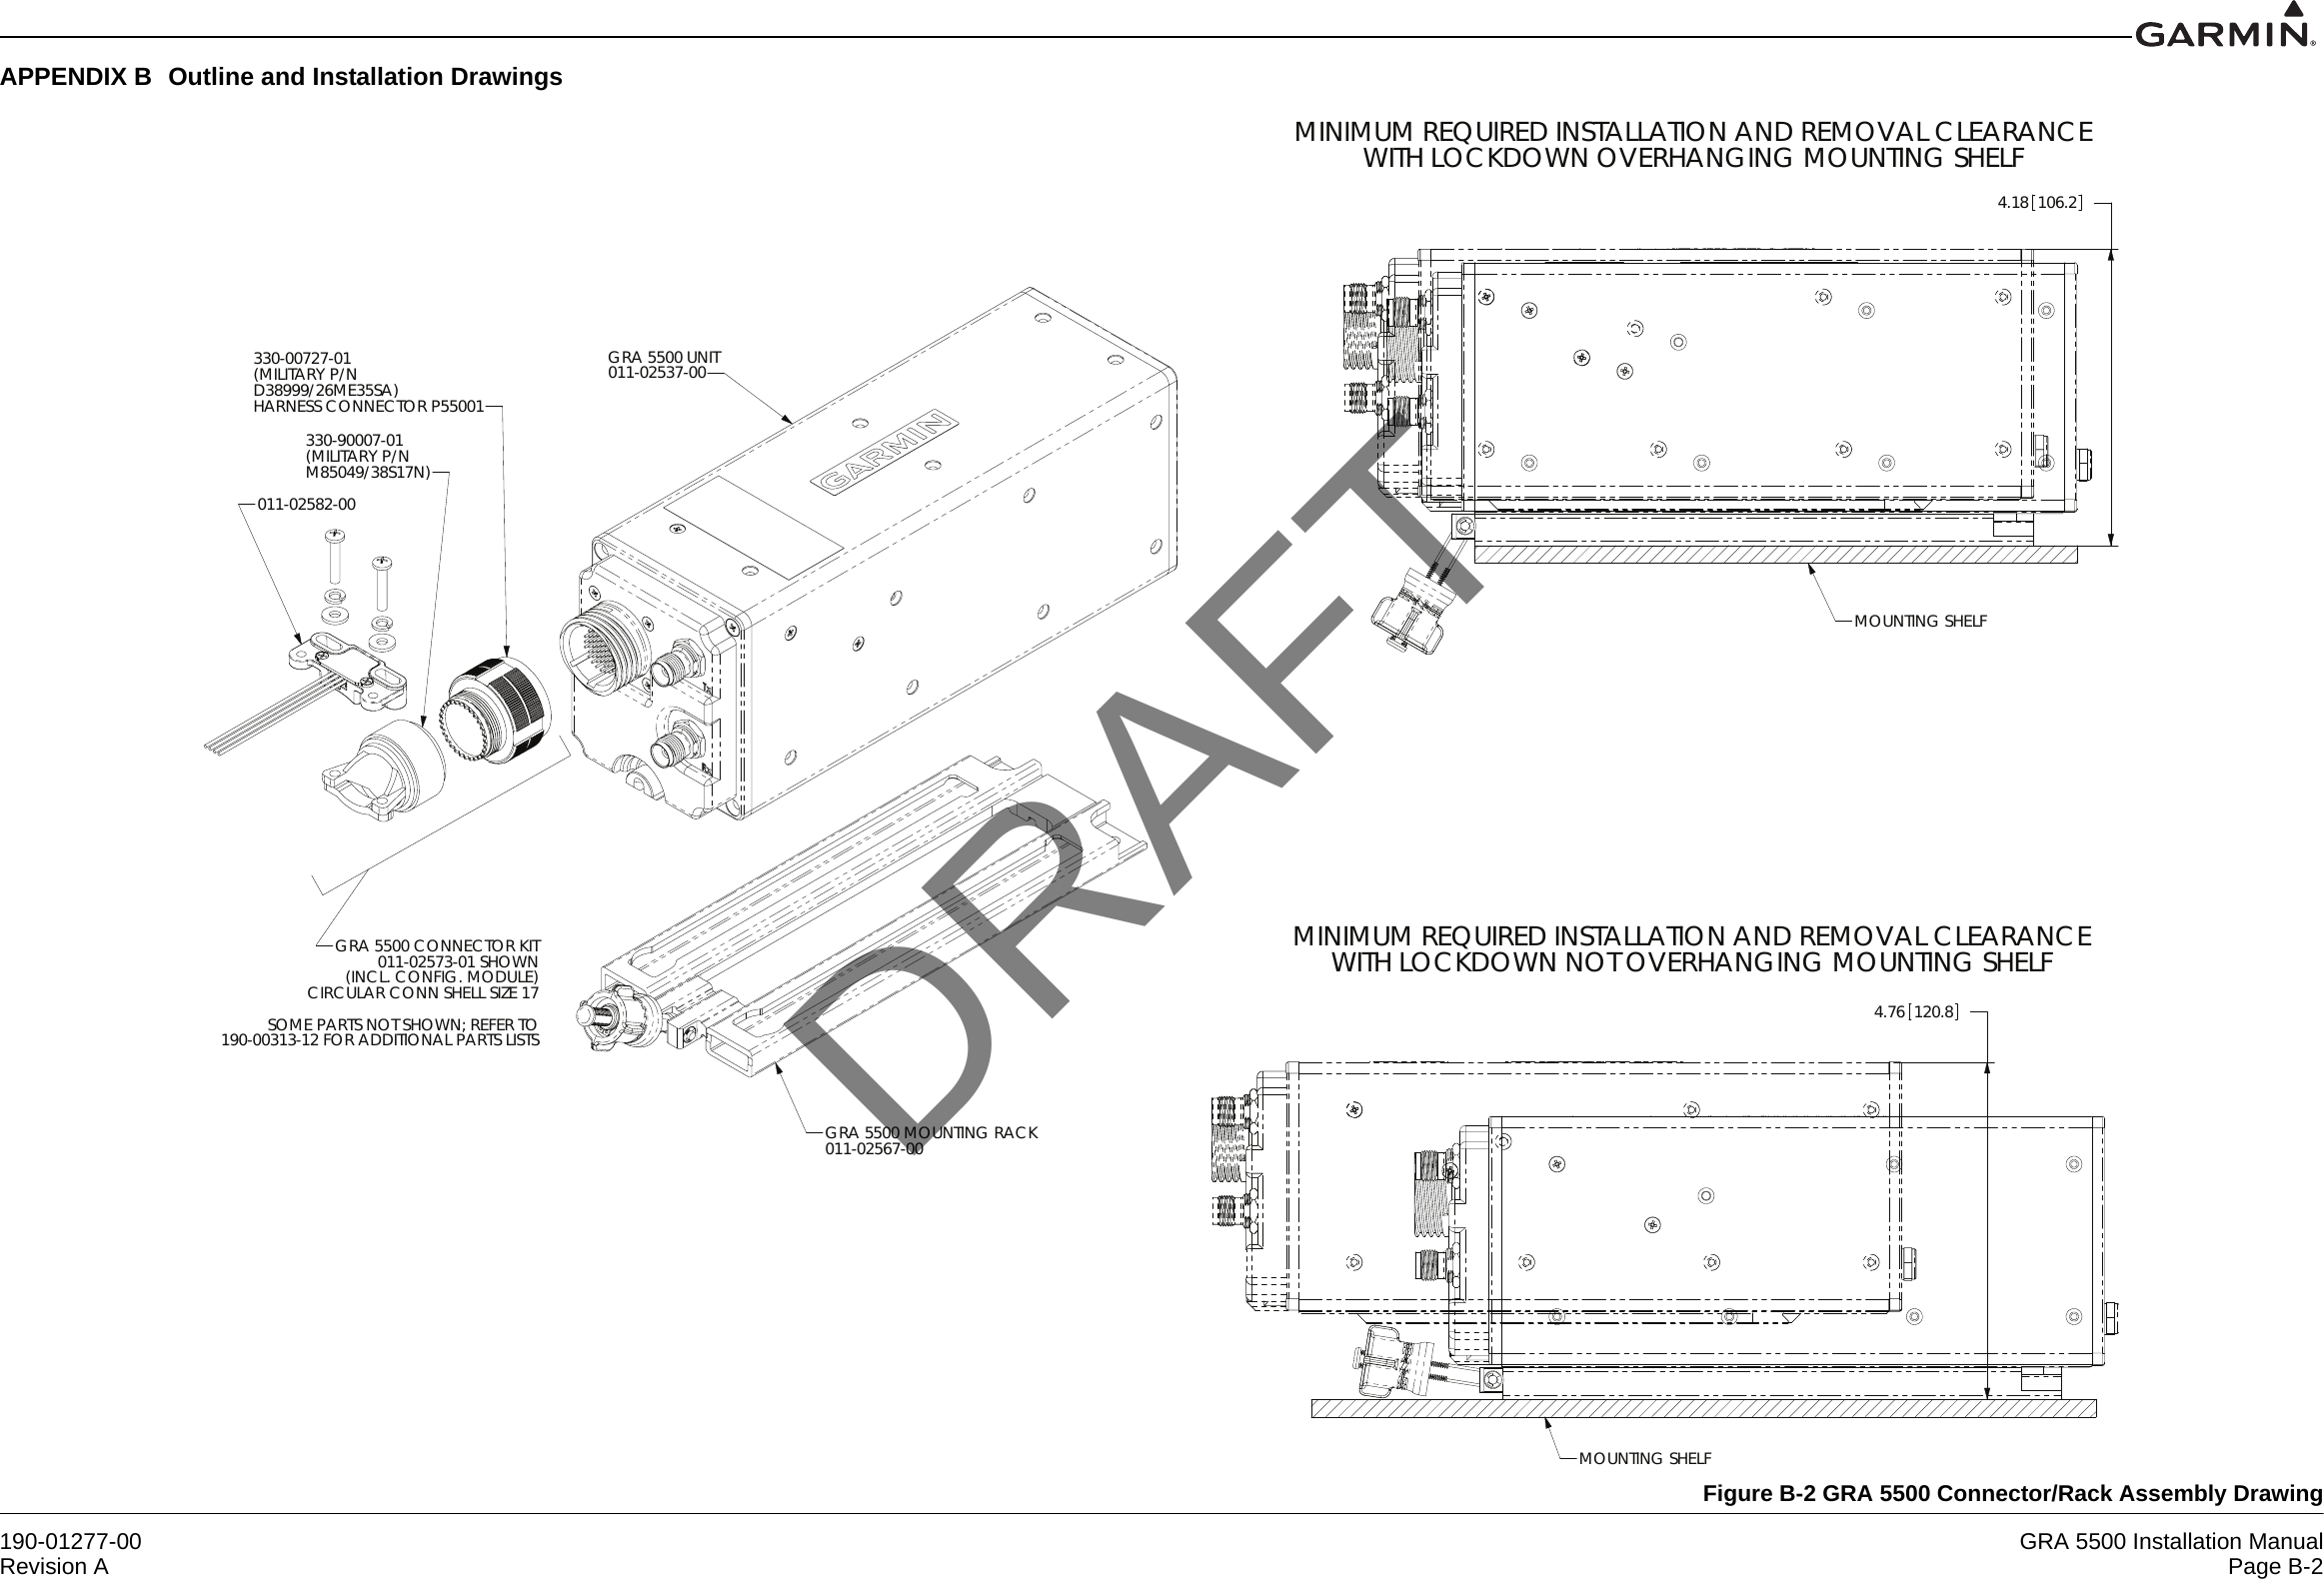 190-01277-00 GRA 5500 Installation ManualRevision A Page B-2APPENDIX B Outline and Installation DrawingsFigure B-2 GRA 5500 Connector/Rack Assembly DrawingGRA 5500 UNIT011-02537-00GRA 5500 MOUNTING RACK011-02567-00GRA 5500 CONNECTOR KIT011-02573-01 SHOWN(INCL. CONFIG. MODULE)CIRCULAR CONN SHELL SIZE 17SOME PARTS NOT SHOWN; REFER TO190-00313-12 FOR ADDITIONAL PARTS LISTS330-00727-01(MILITARY P/ND38999/26ME35SA)HARNESS CONNECTOR P55001330-90007-01(MILITARY P/NM85049/38S17N)011-02582-004.18106.2MINIMUM REQUIRED INSTALLATION AND REMOVAL CLEARANCEWITH LOCKDOWN OVERHANGING MOUNTING SHELFMOUNTING SHELF4.76120.8MINIMUM REQUIRED INSTALLATION AND REMOVAL CLEARANCEWITH LOCKDOWN NOT OVERHANGING MOUNTING SHELFMOUNTING SHELFDRAFT